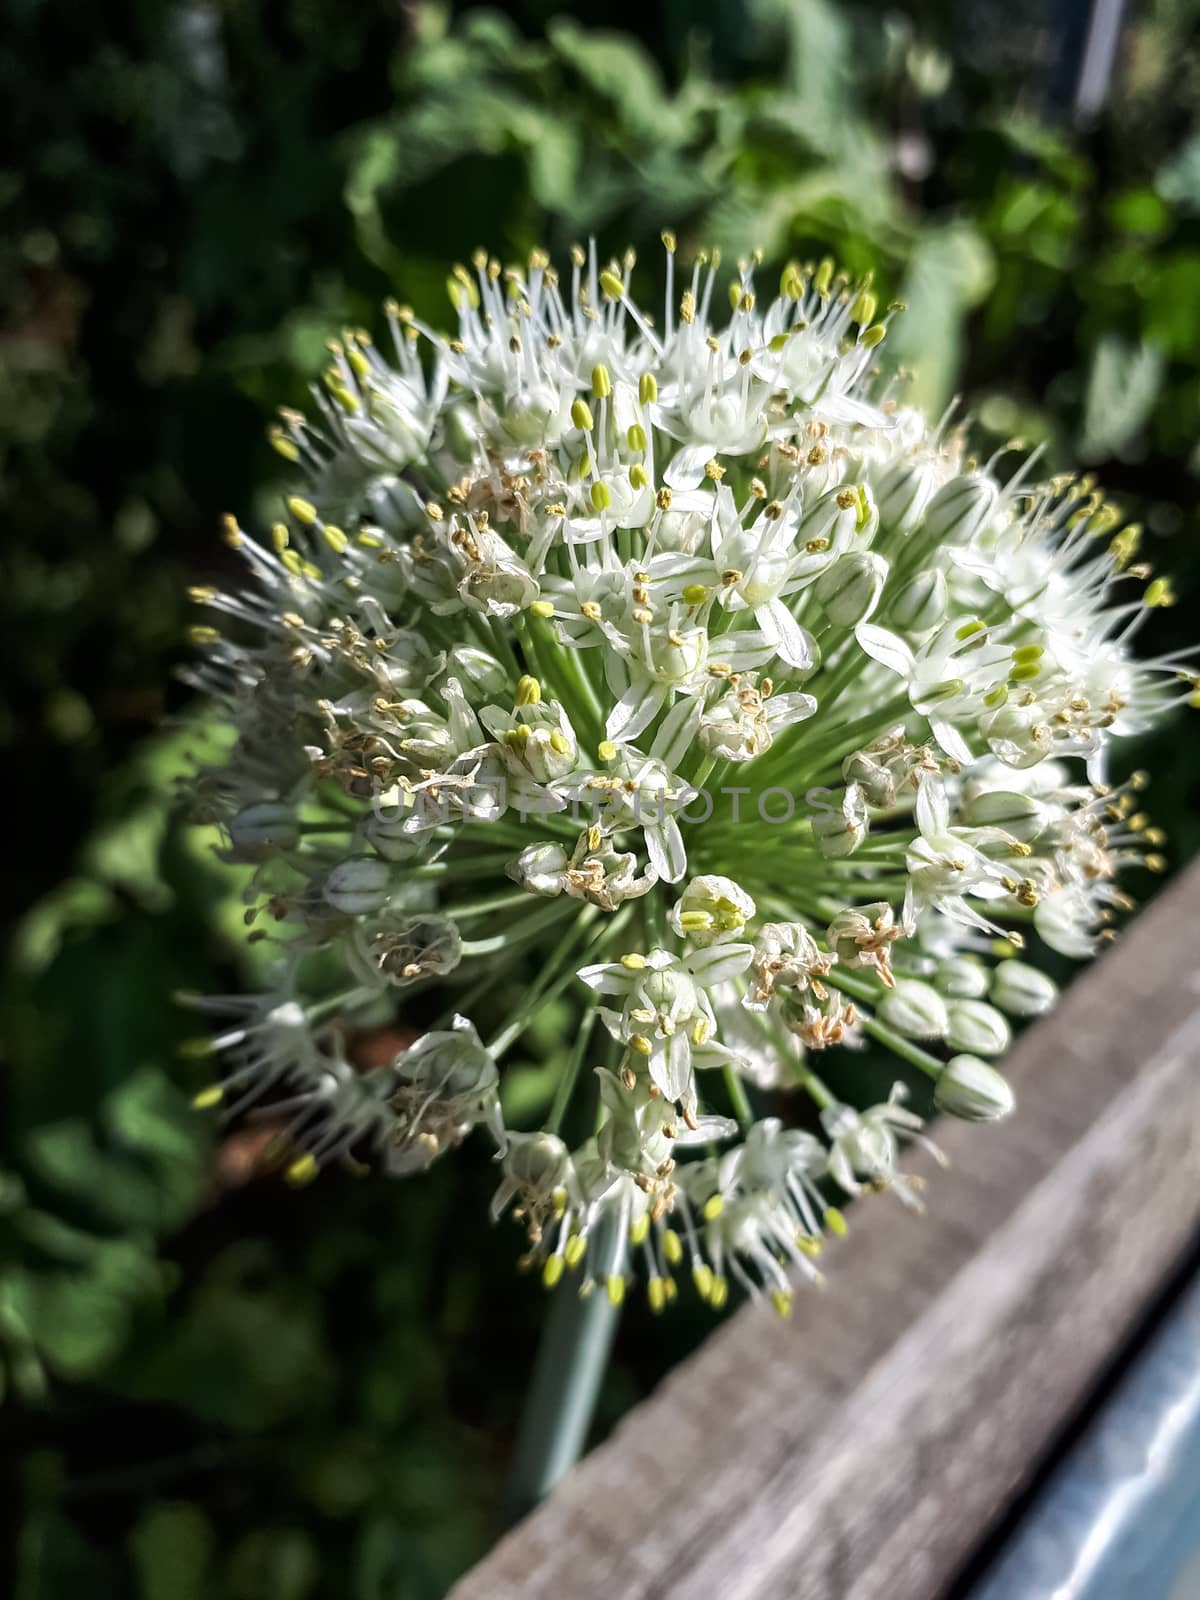 Blossoming onion, Onion Inflorescence, so flowered onions.